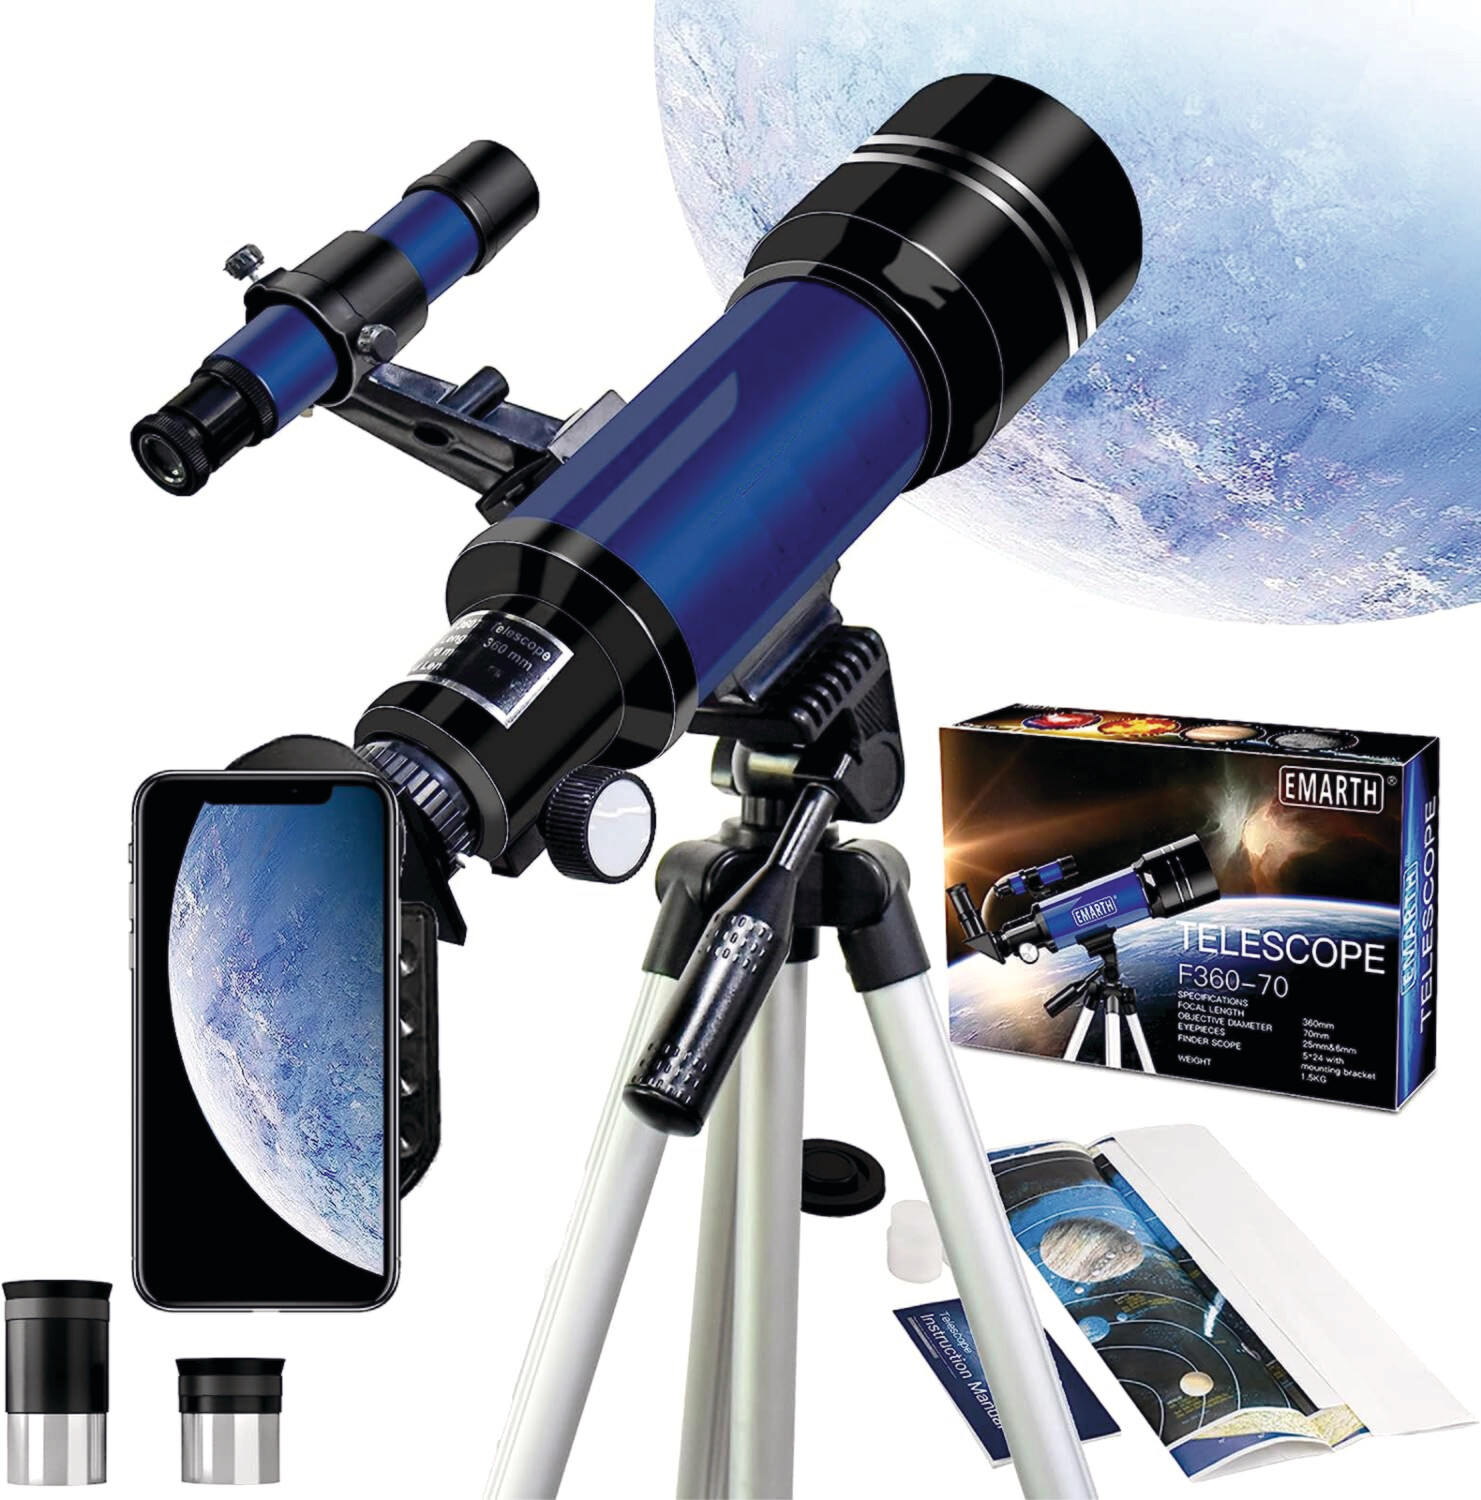 70mm Portable Astronomical Travel Refractor Telescope Ideal for Children, with Adjustable Tripod.